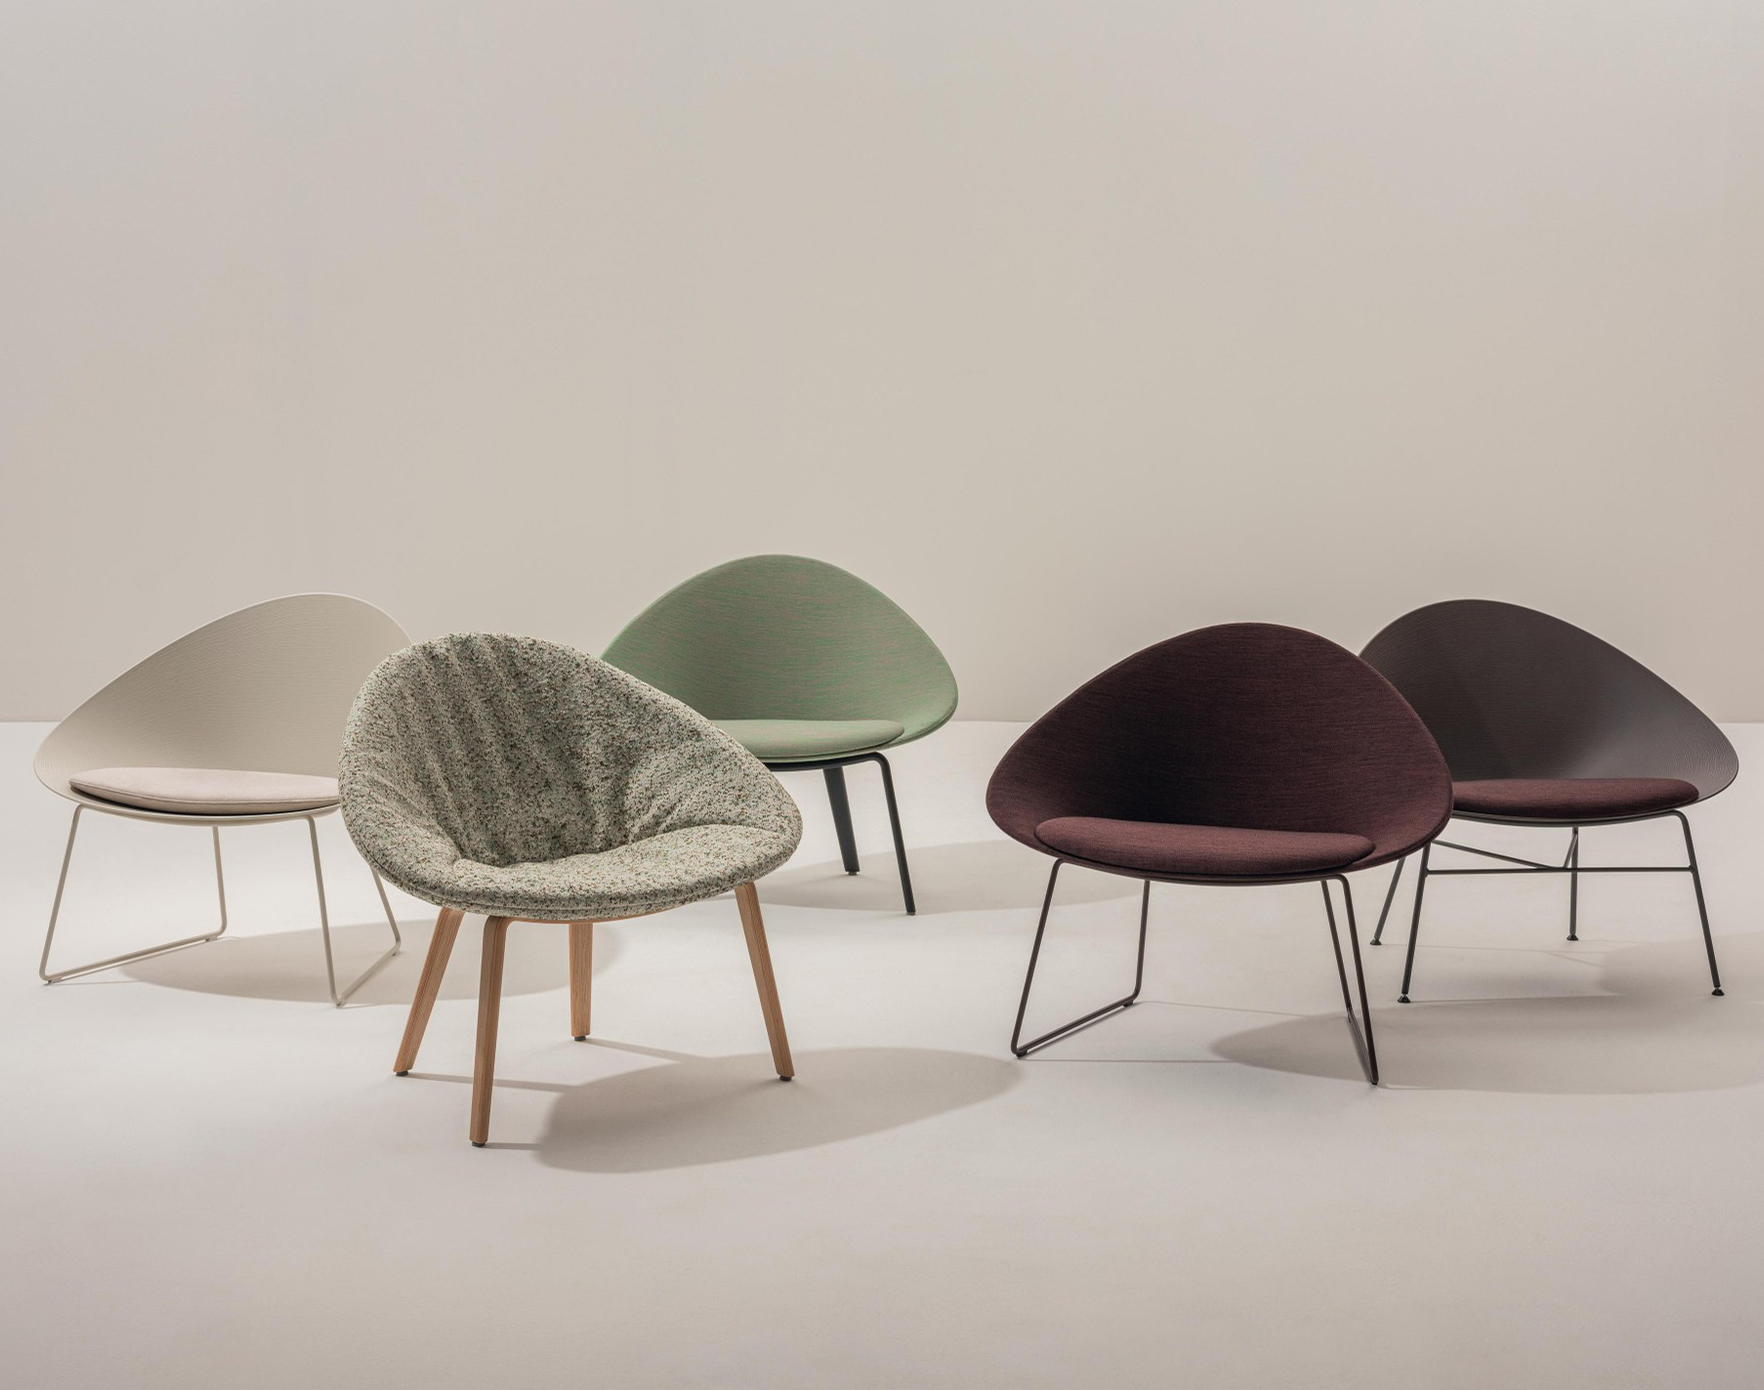 Just Landed – Arper ‘Adell’ Chair